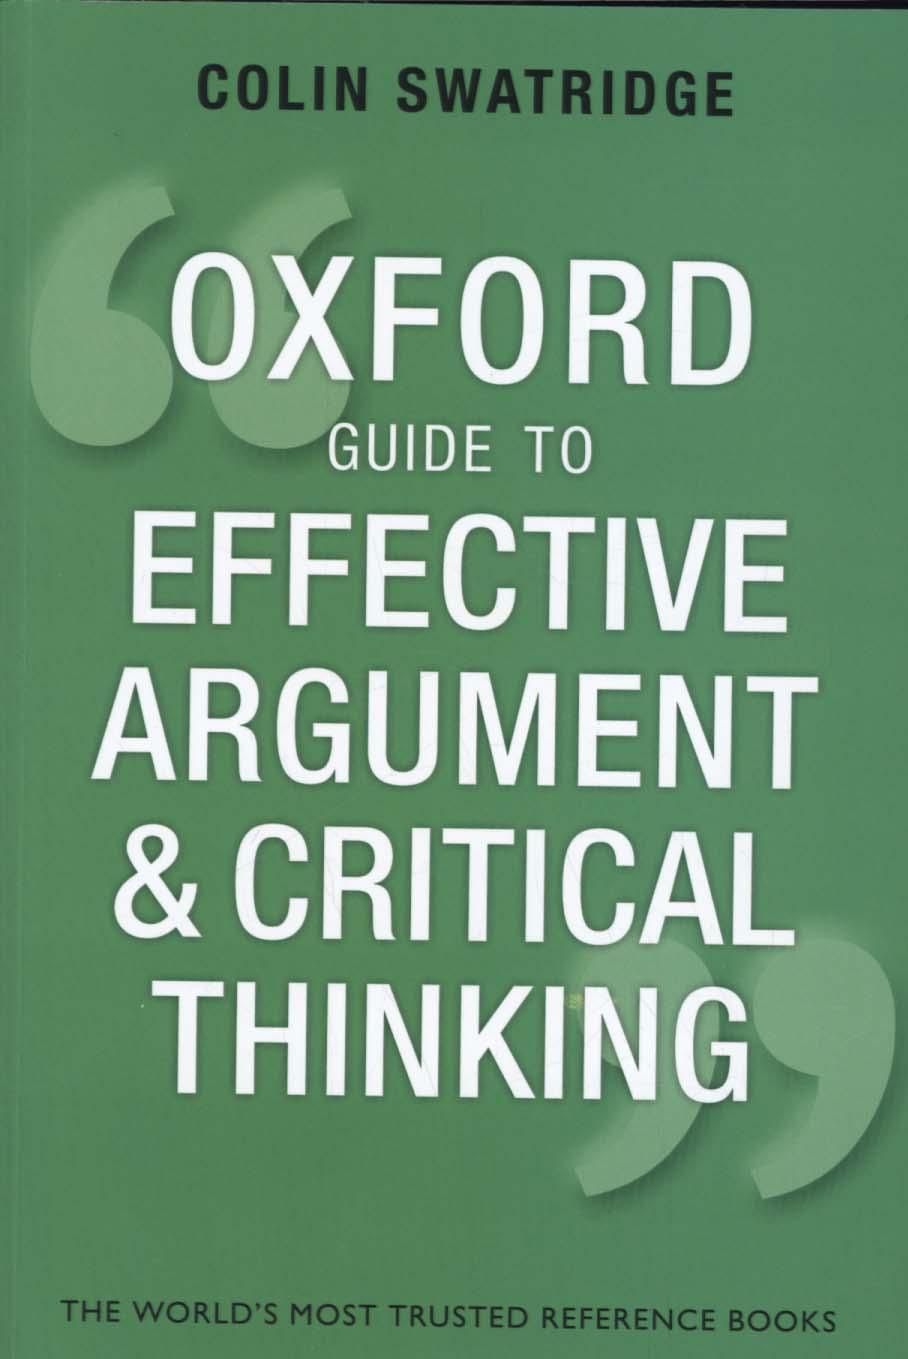 Oxford Guide to Effective Argument and Critical Thinking - Colin Swatridge